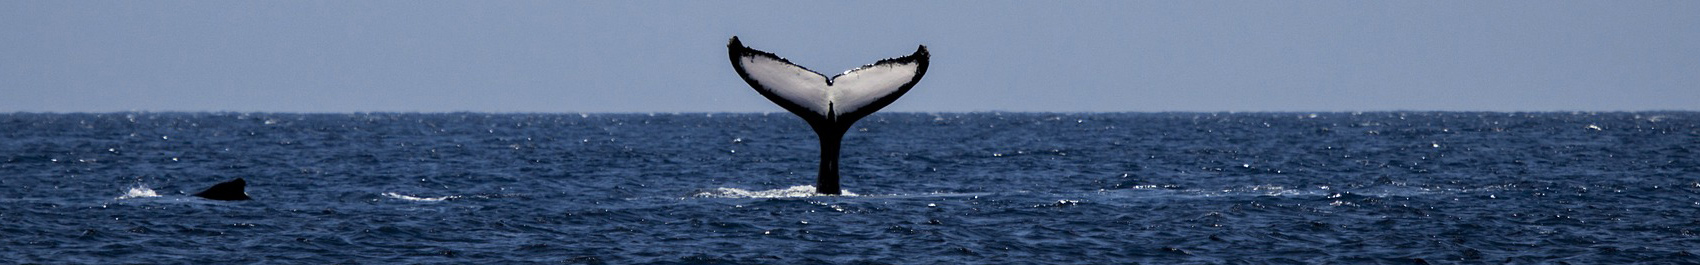 Whale tail above the surface of the water